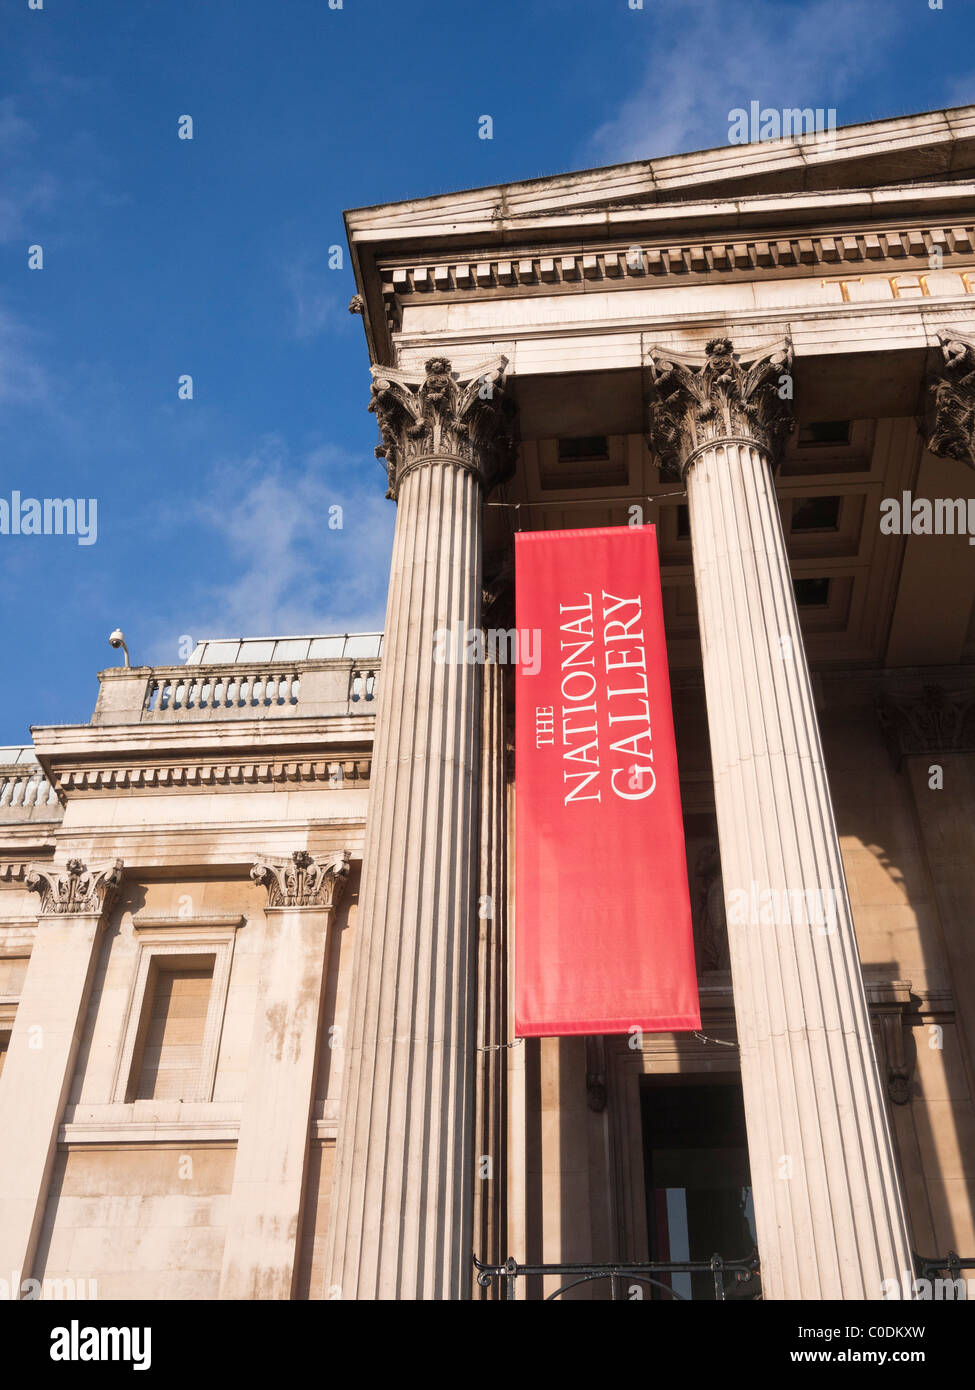 Detail of the facade of the National Gallery London England UK Stock Photo